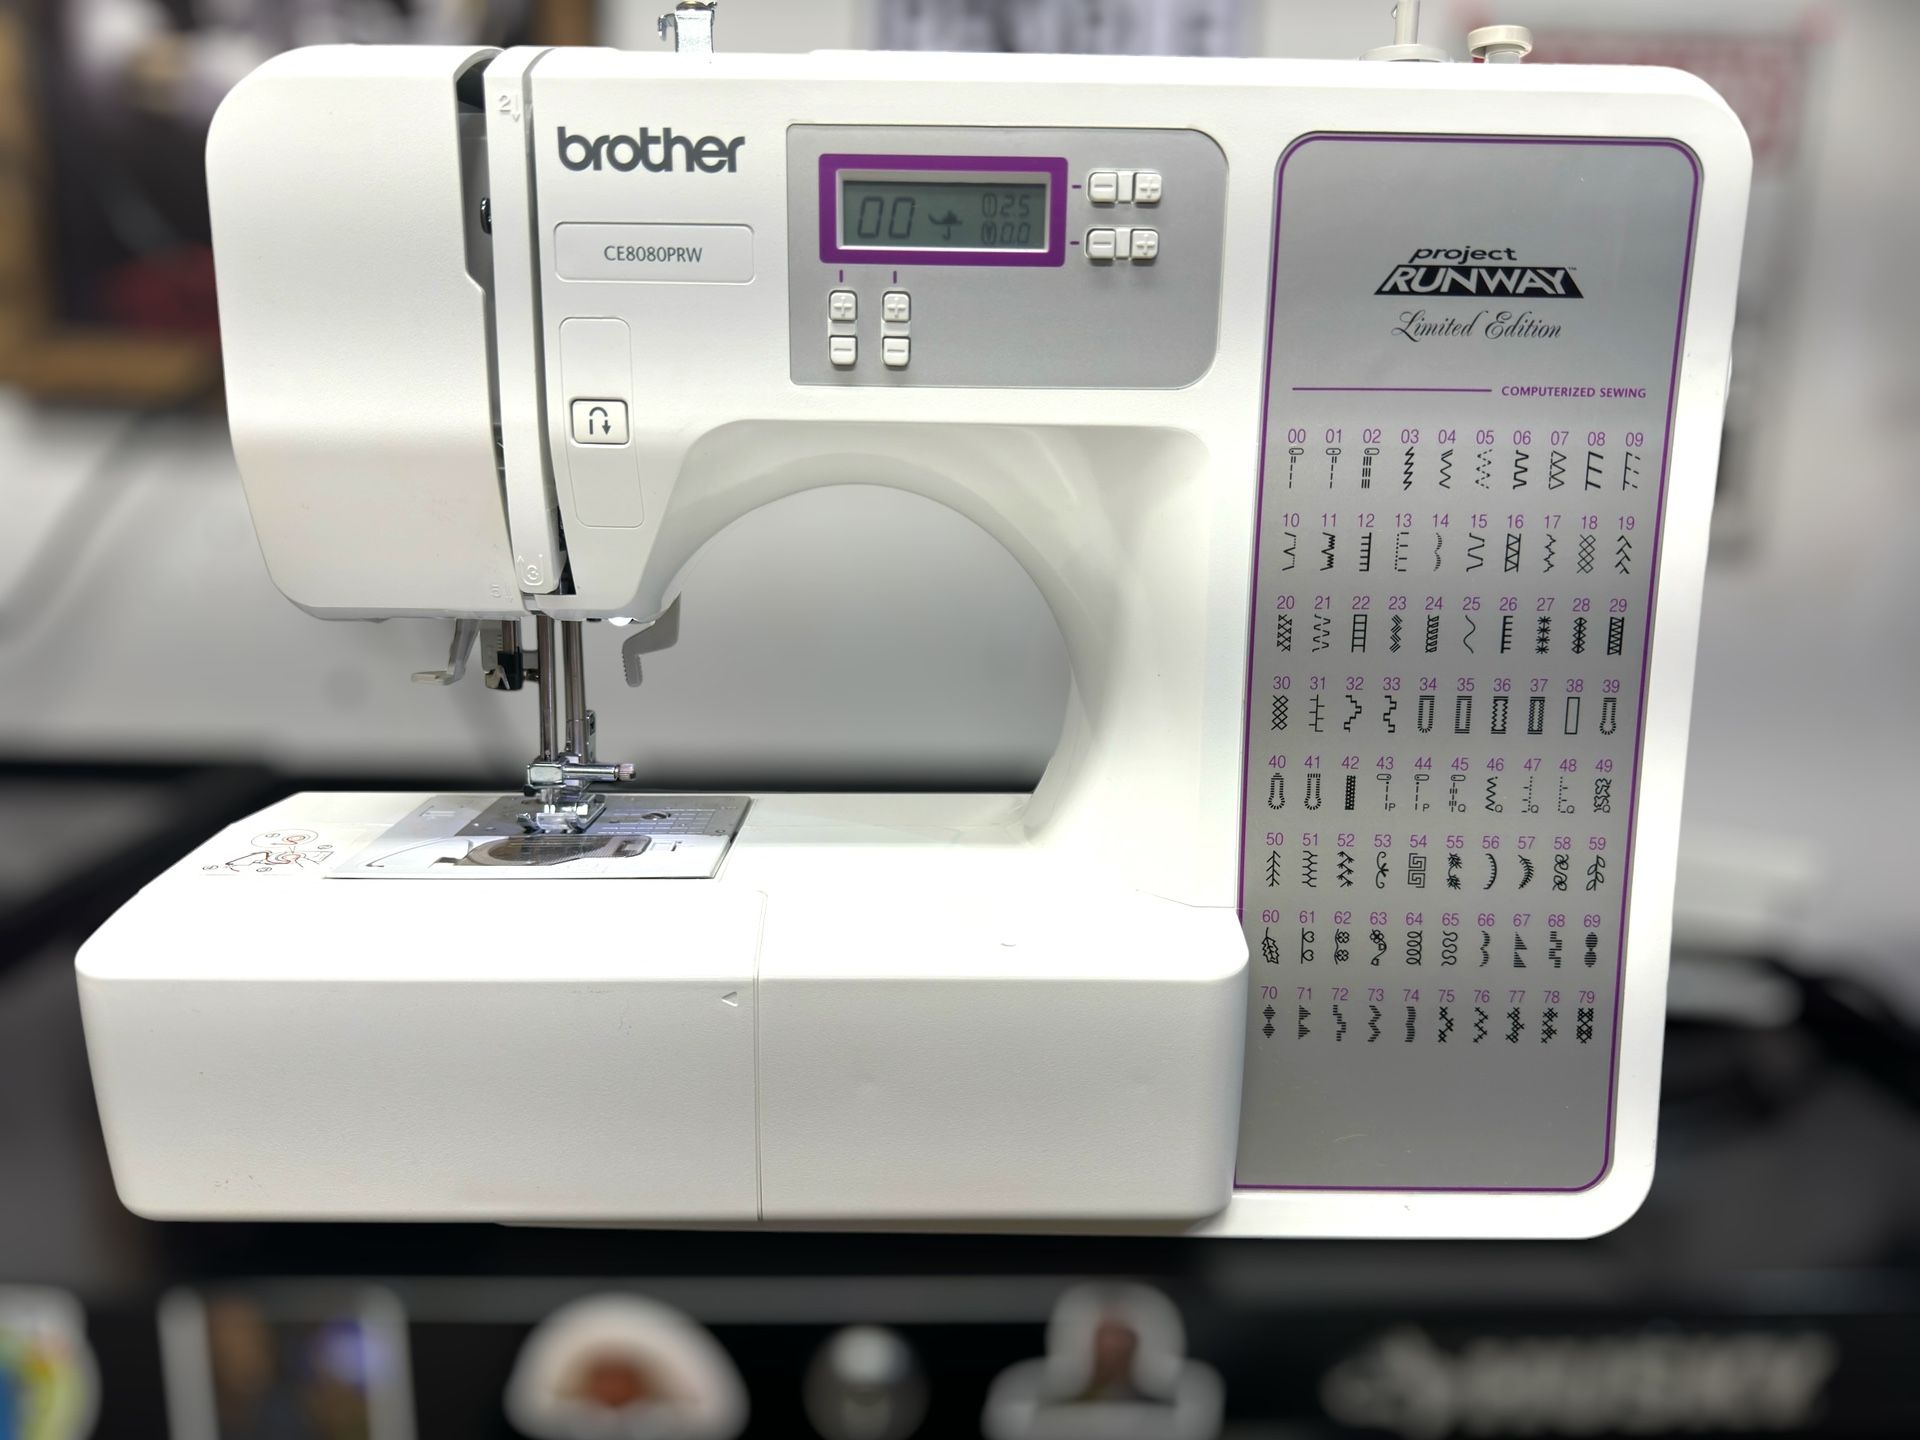 Brother CE8080PRW “ Project Runway” Limited Edition, Sewing Machine